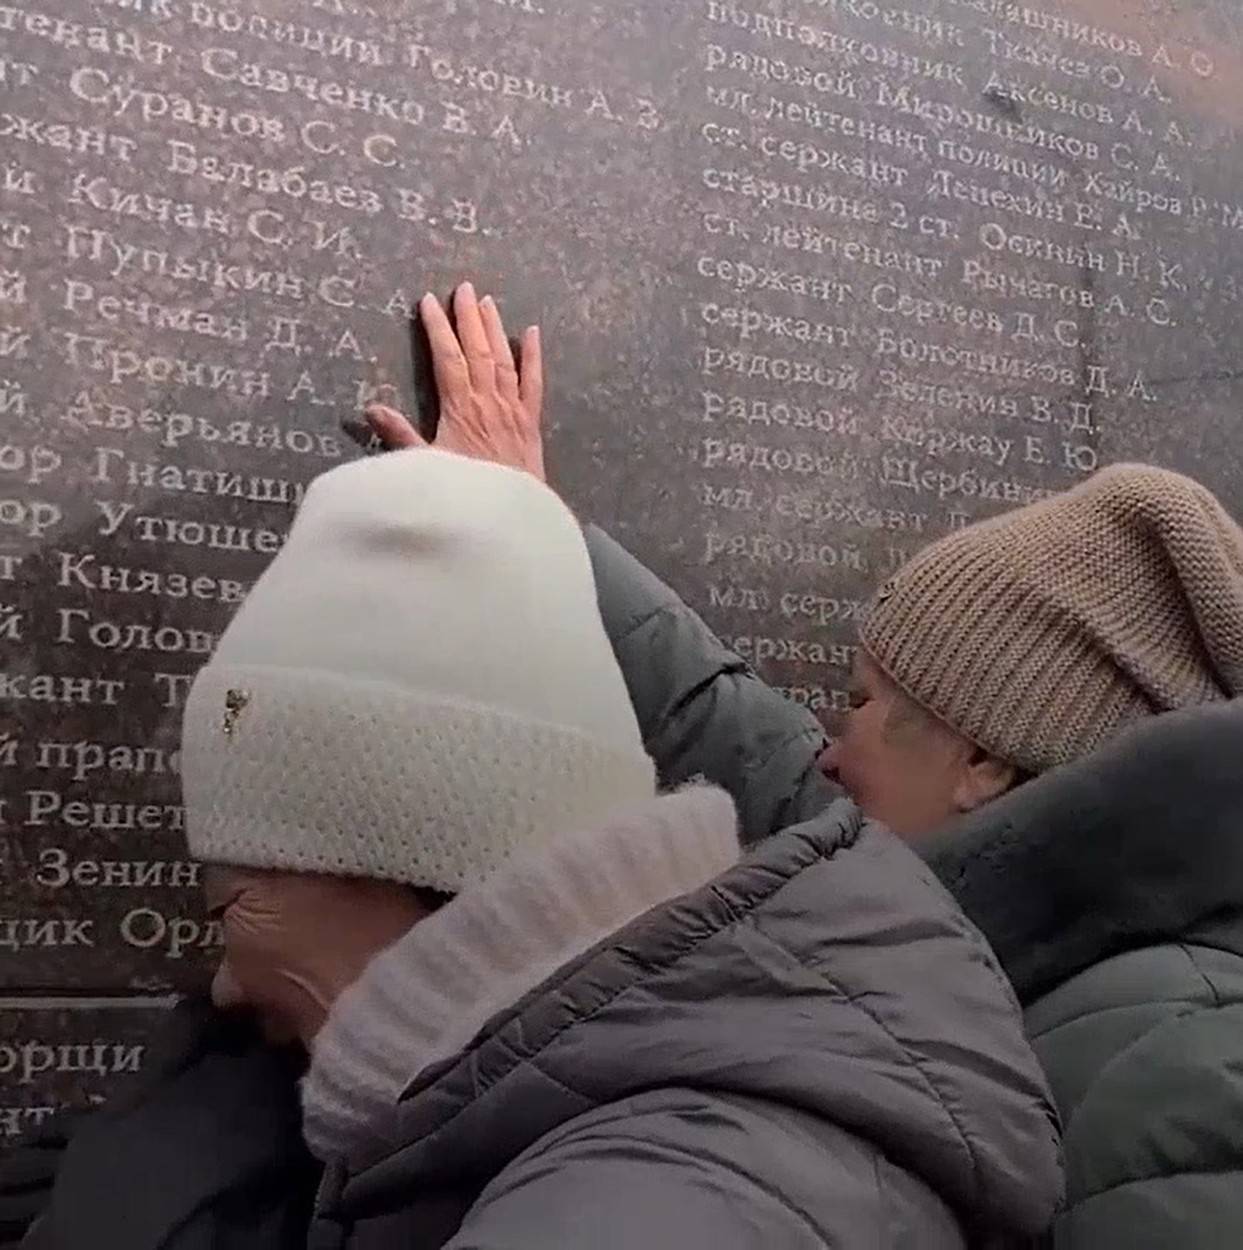 Agony etched on the faces of grief-stricken relatives at a new Saratov memorial to Russian troops slain in Putin's war in Ukraine.